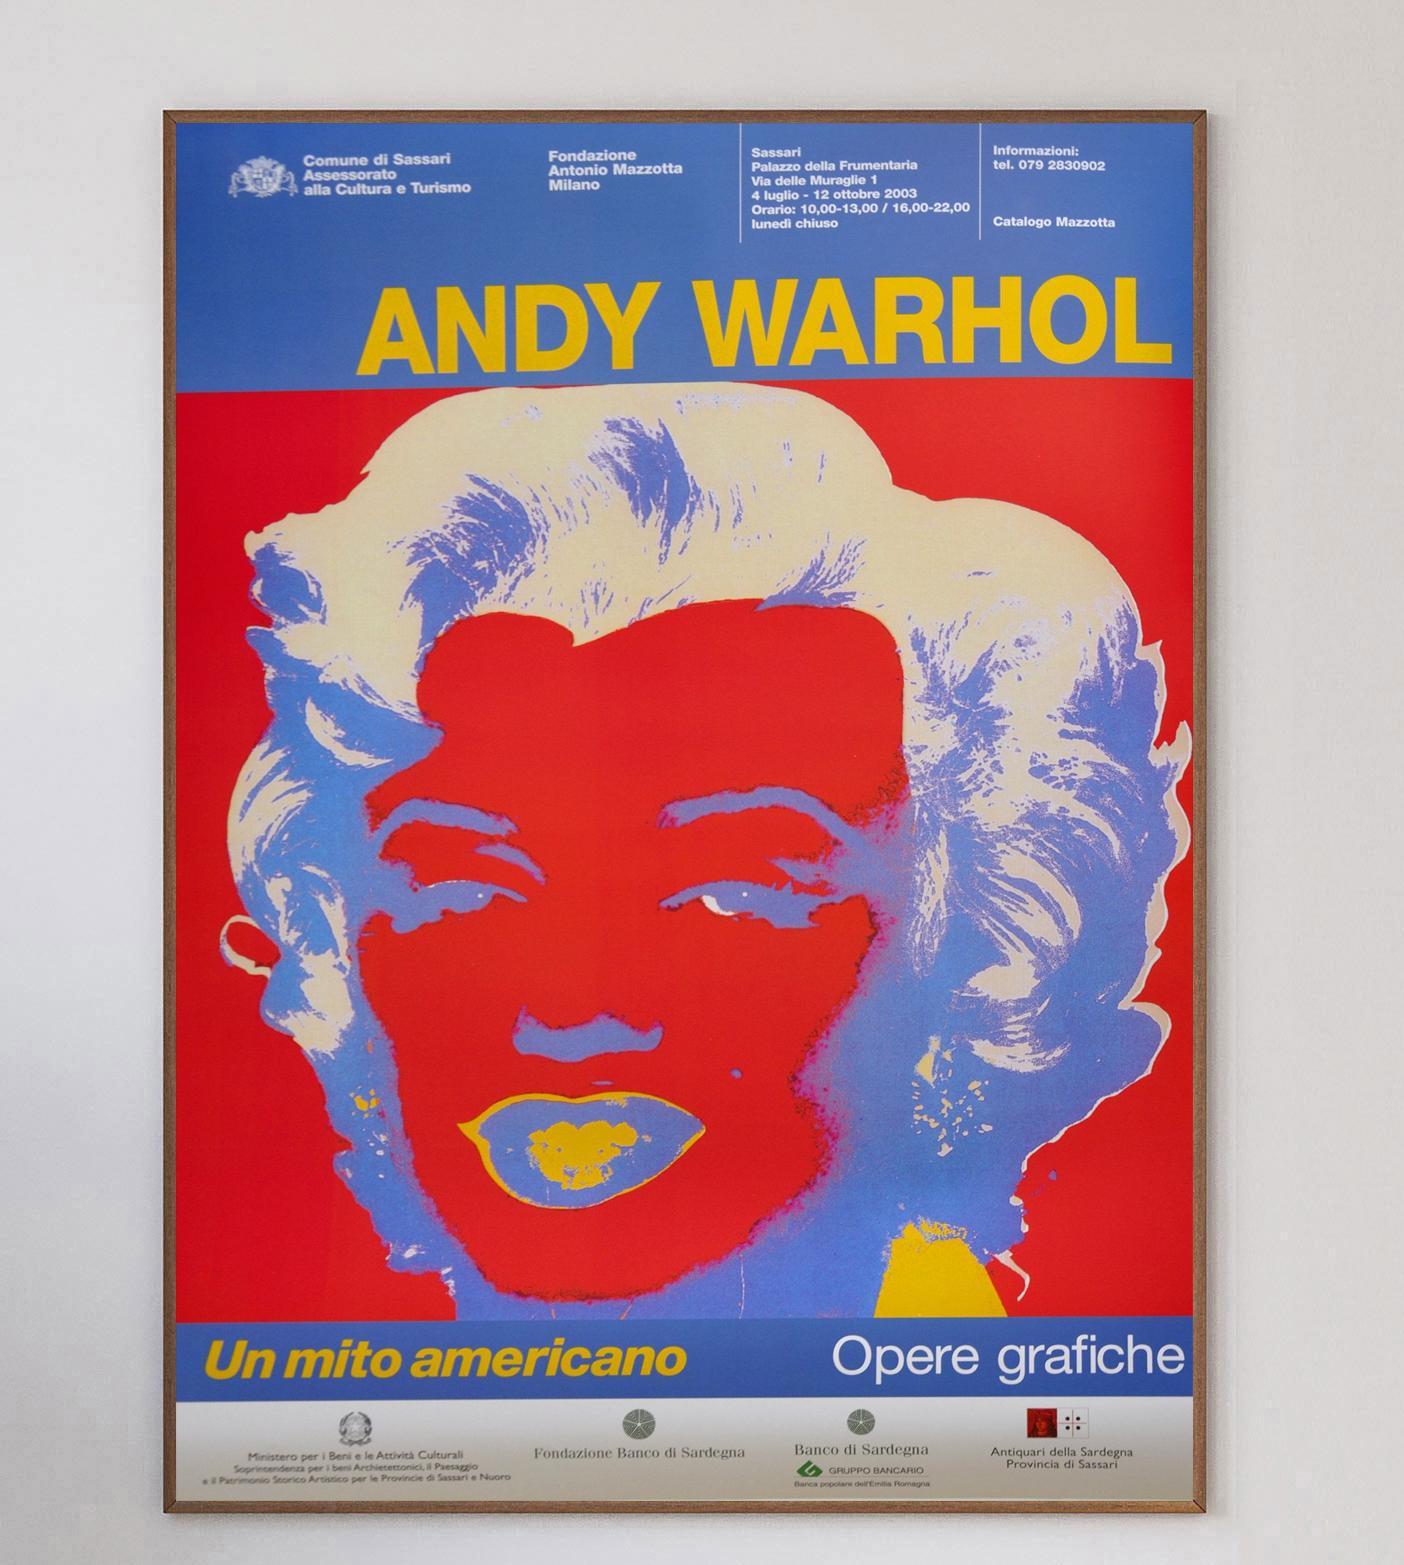 This stunning, bright and vibrant poster was created for the Andy Warhol - Un Mito Americano or 